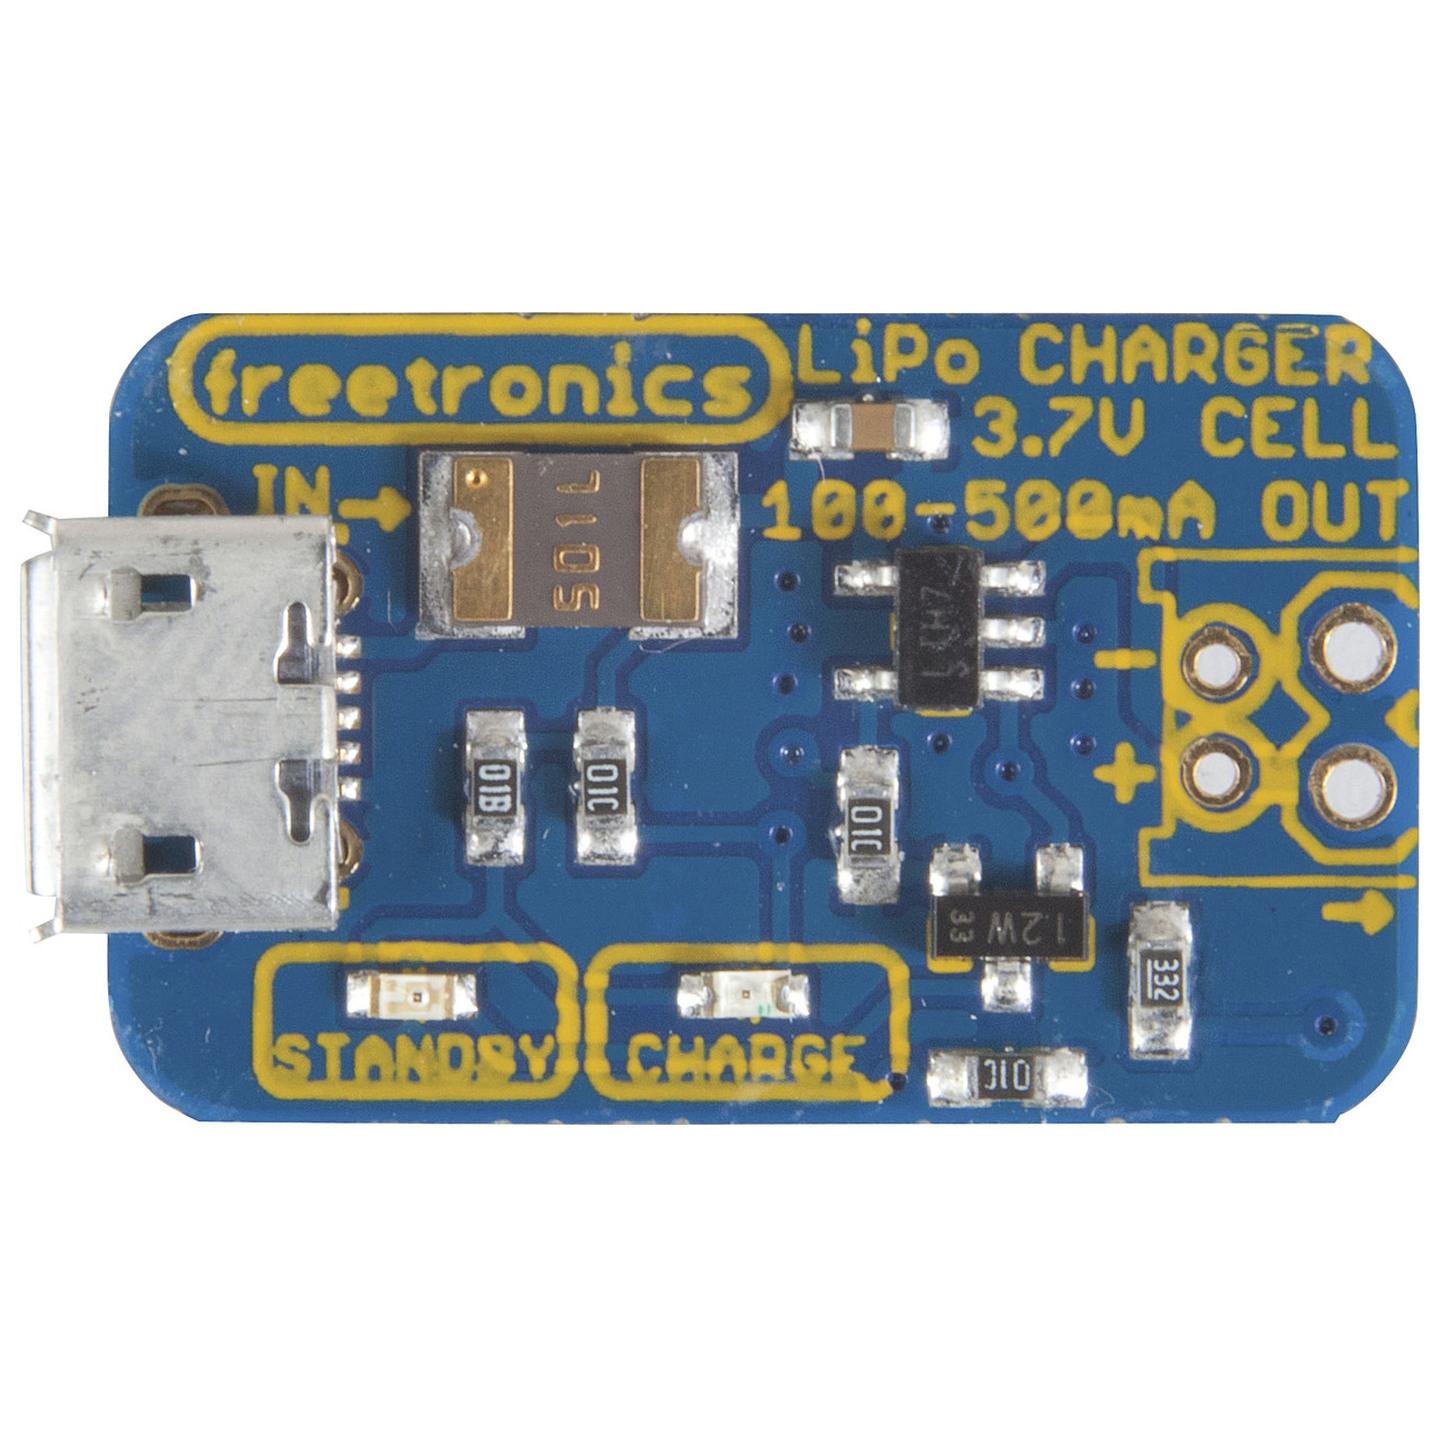 USB Lipo Charger for Arduino